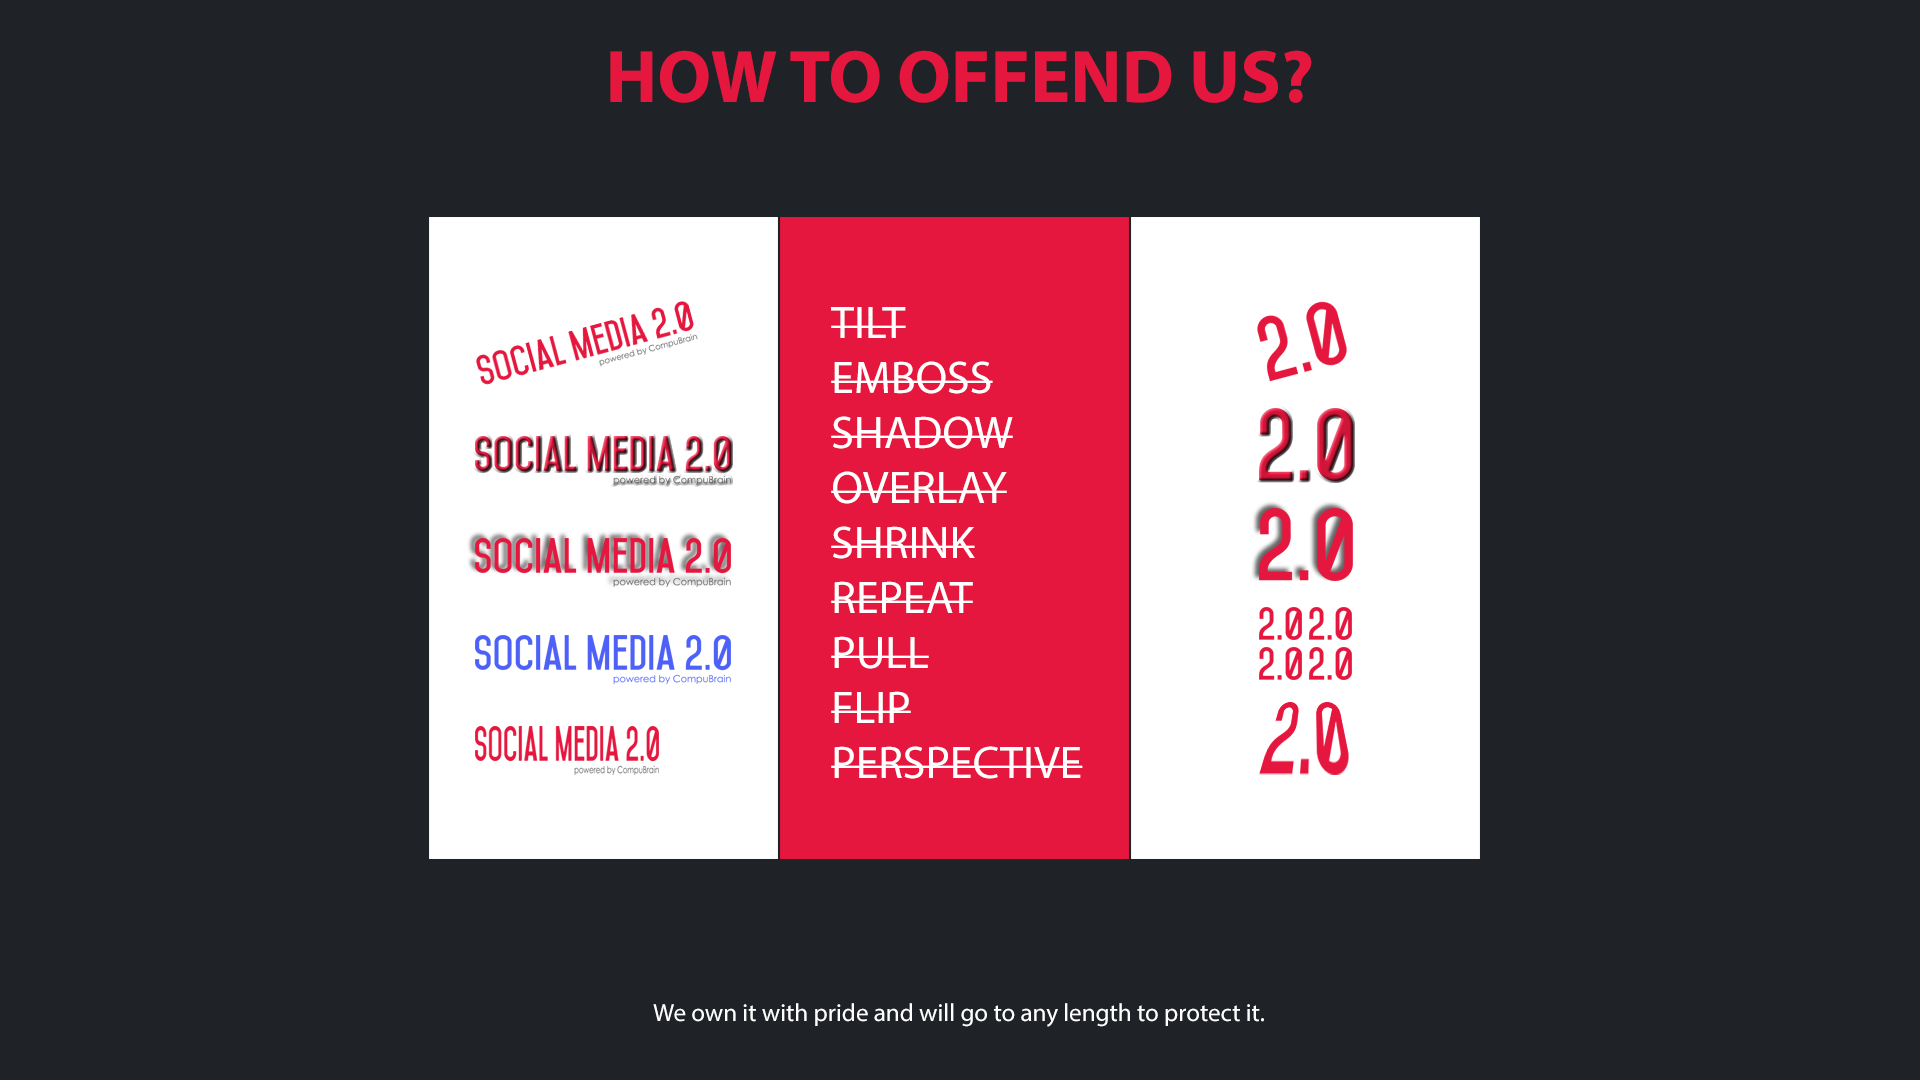 Social Media 2.0 - How to offend Us?